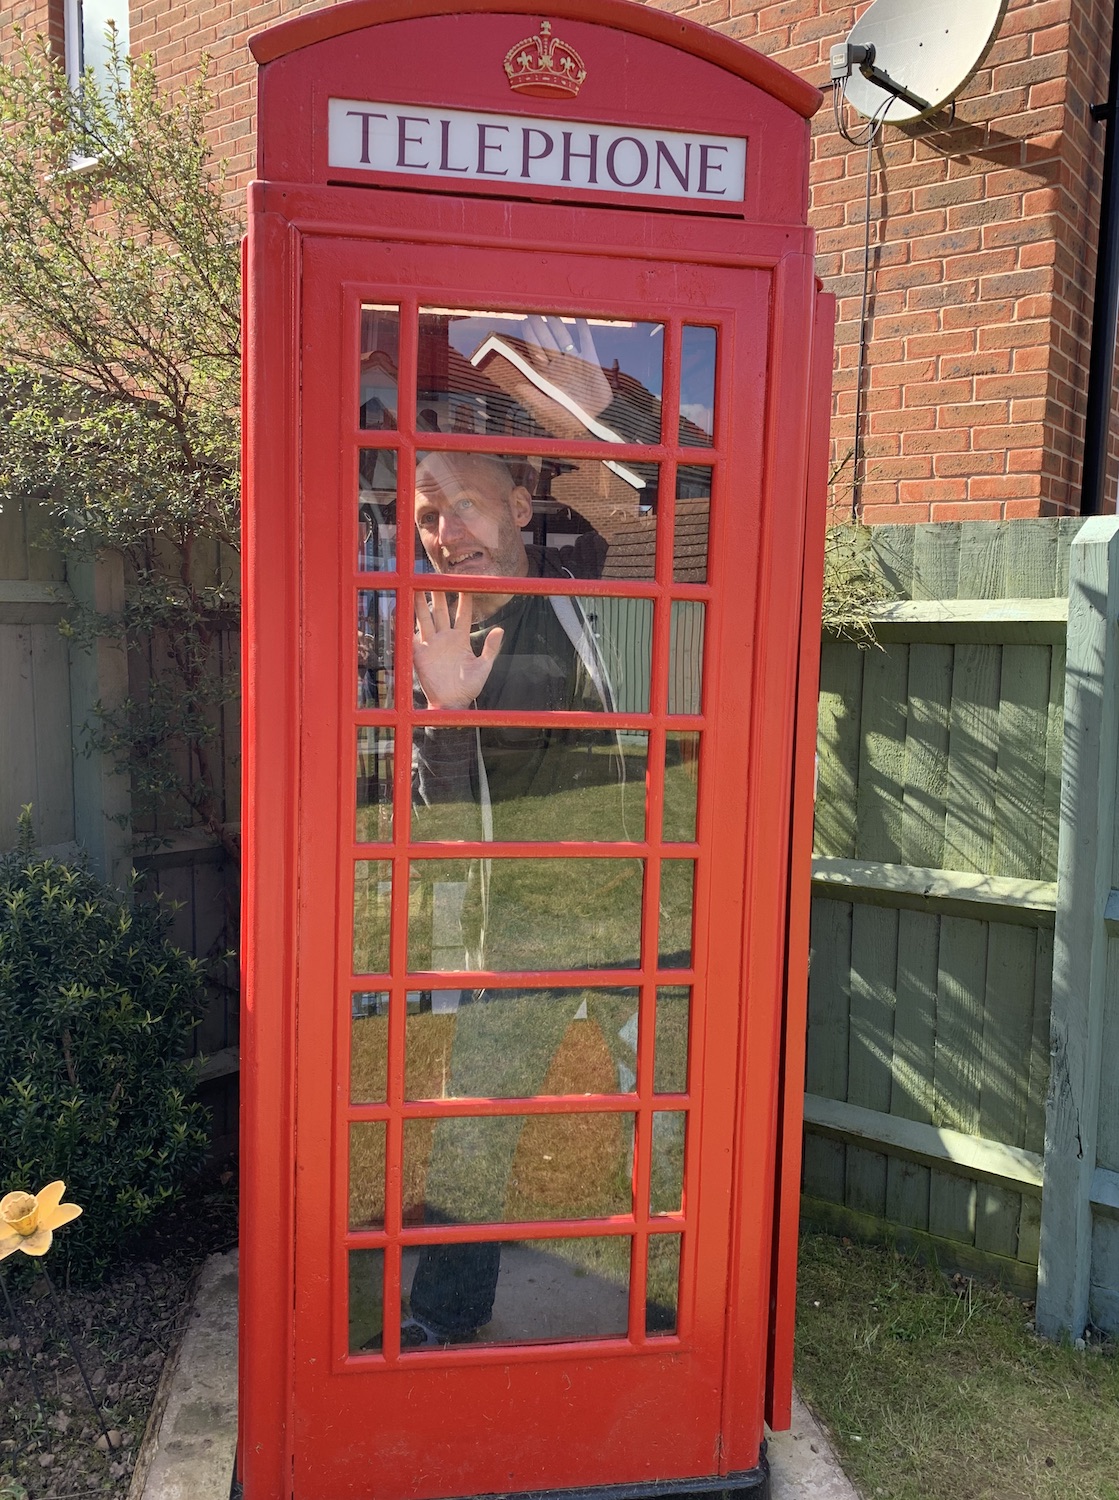 David Moody trapped in a phone box